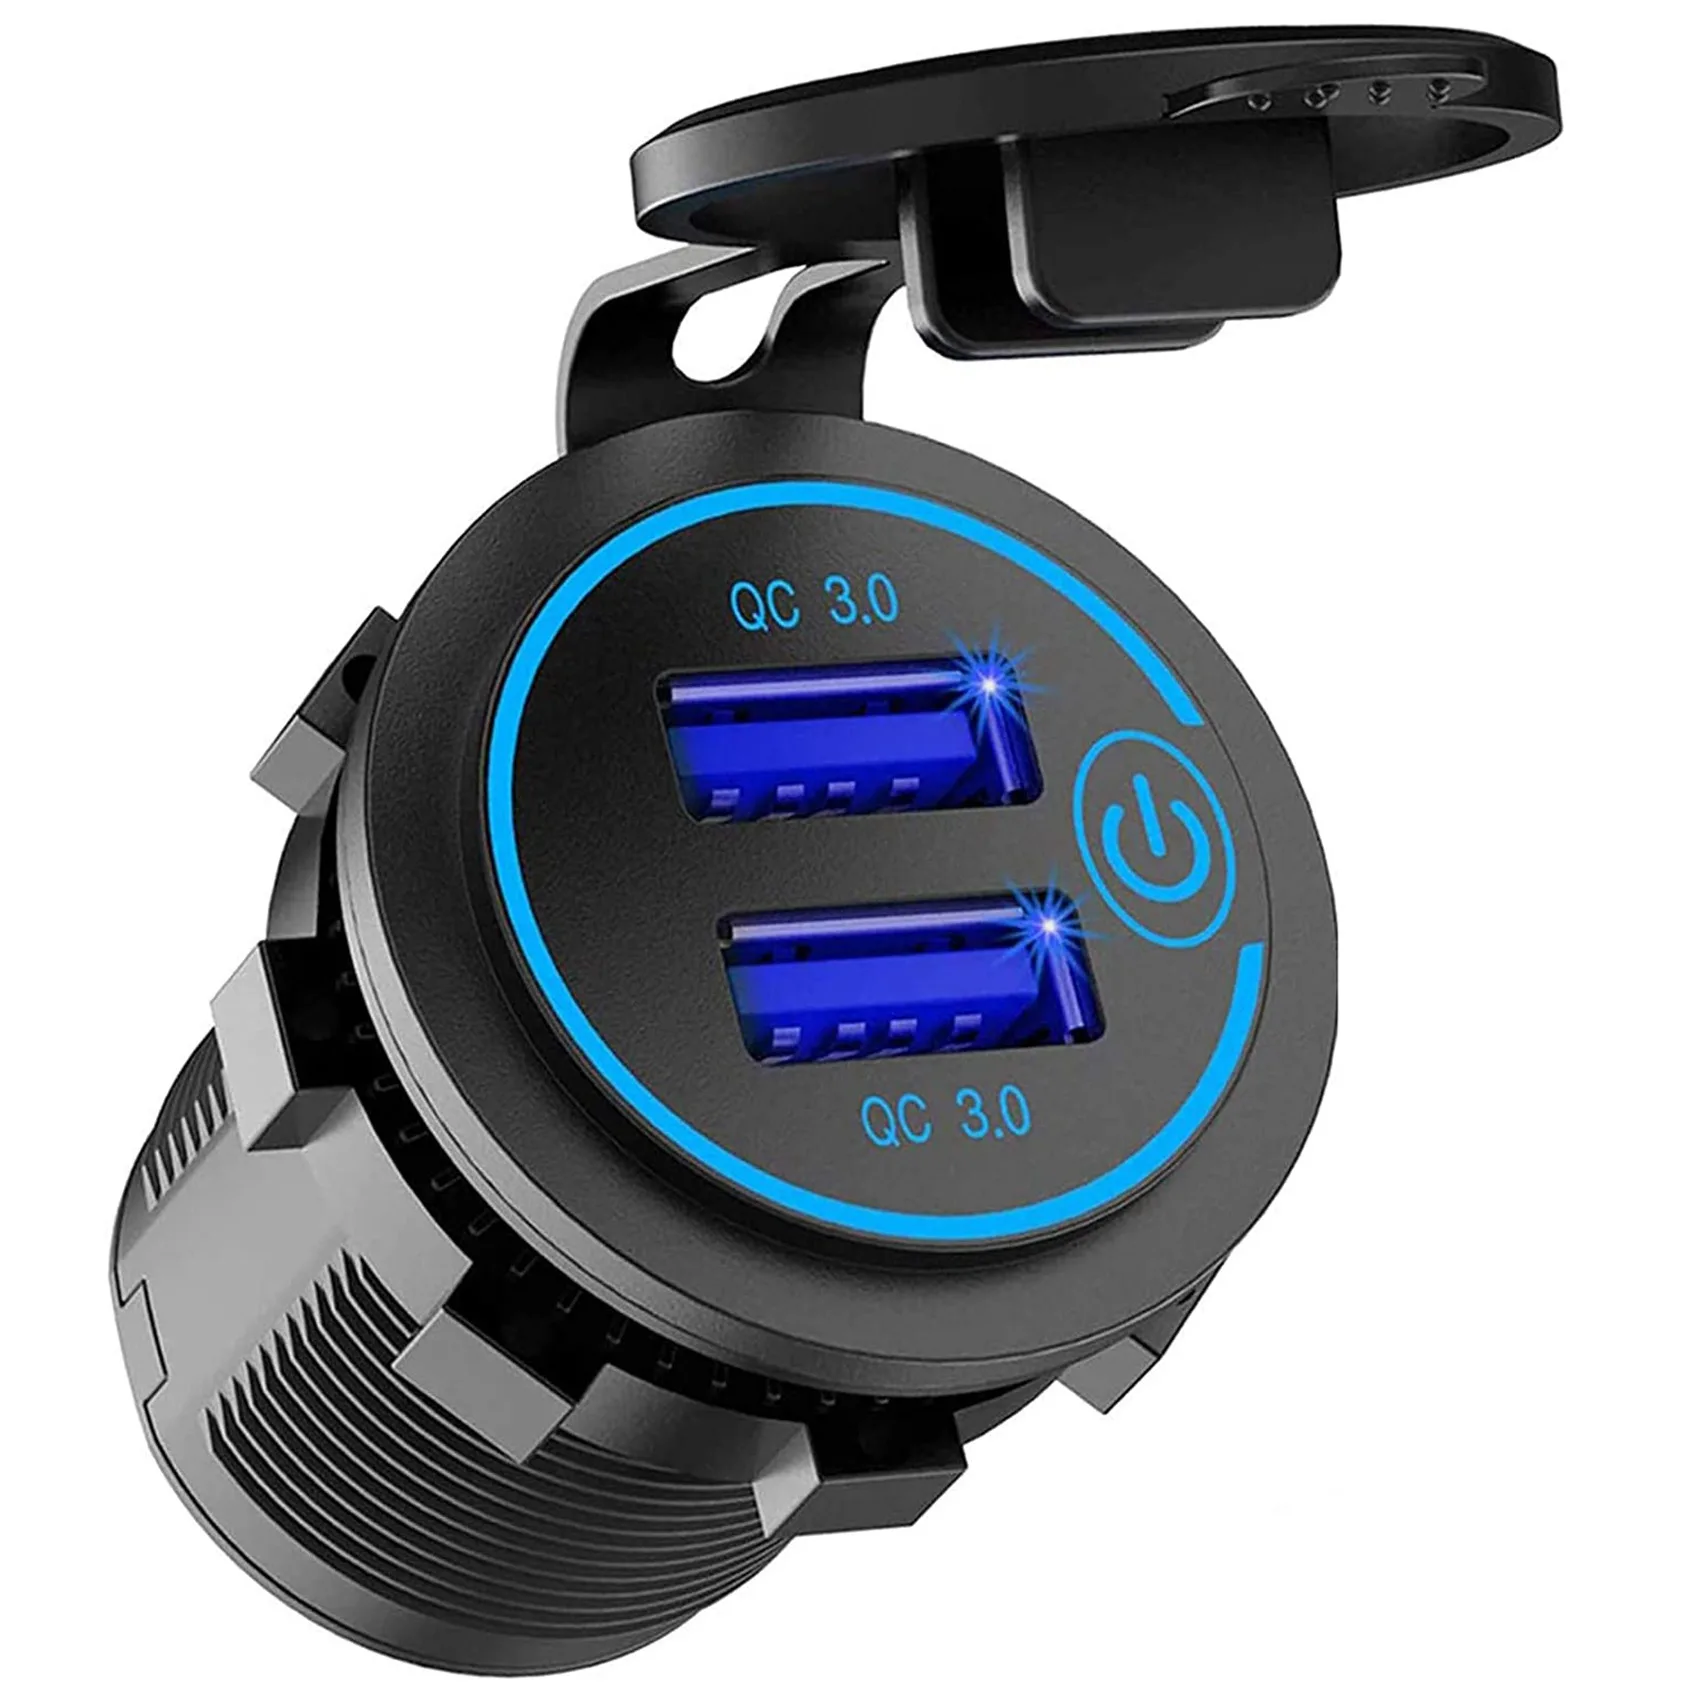 

12V USB Outlet, Dual QC 3.0 USB Car Charger with Switch, 36W USB Waterproof Power Outlet Charger(with 1.1Inch Puncher)